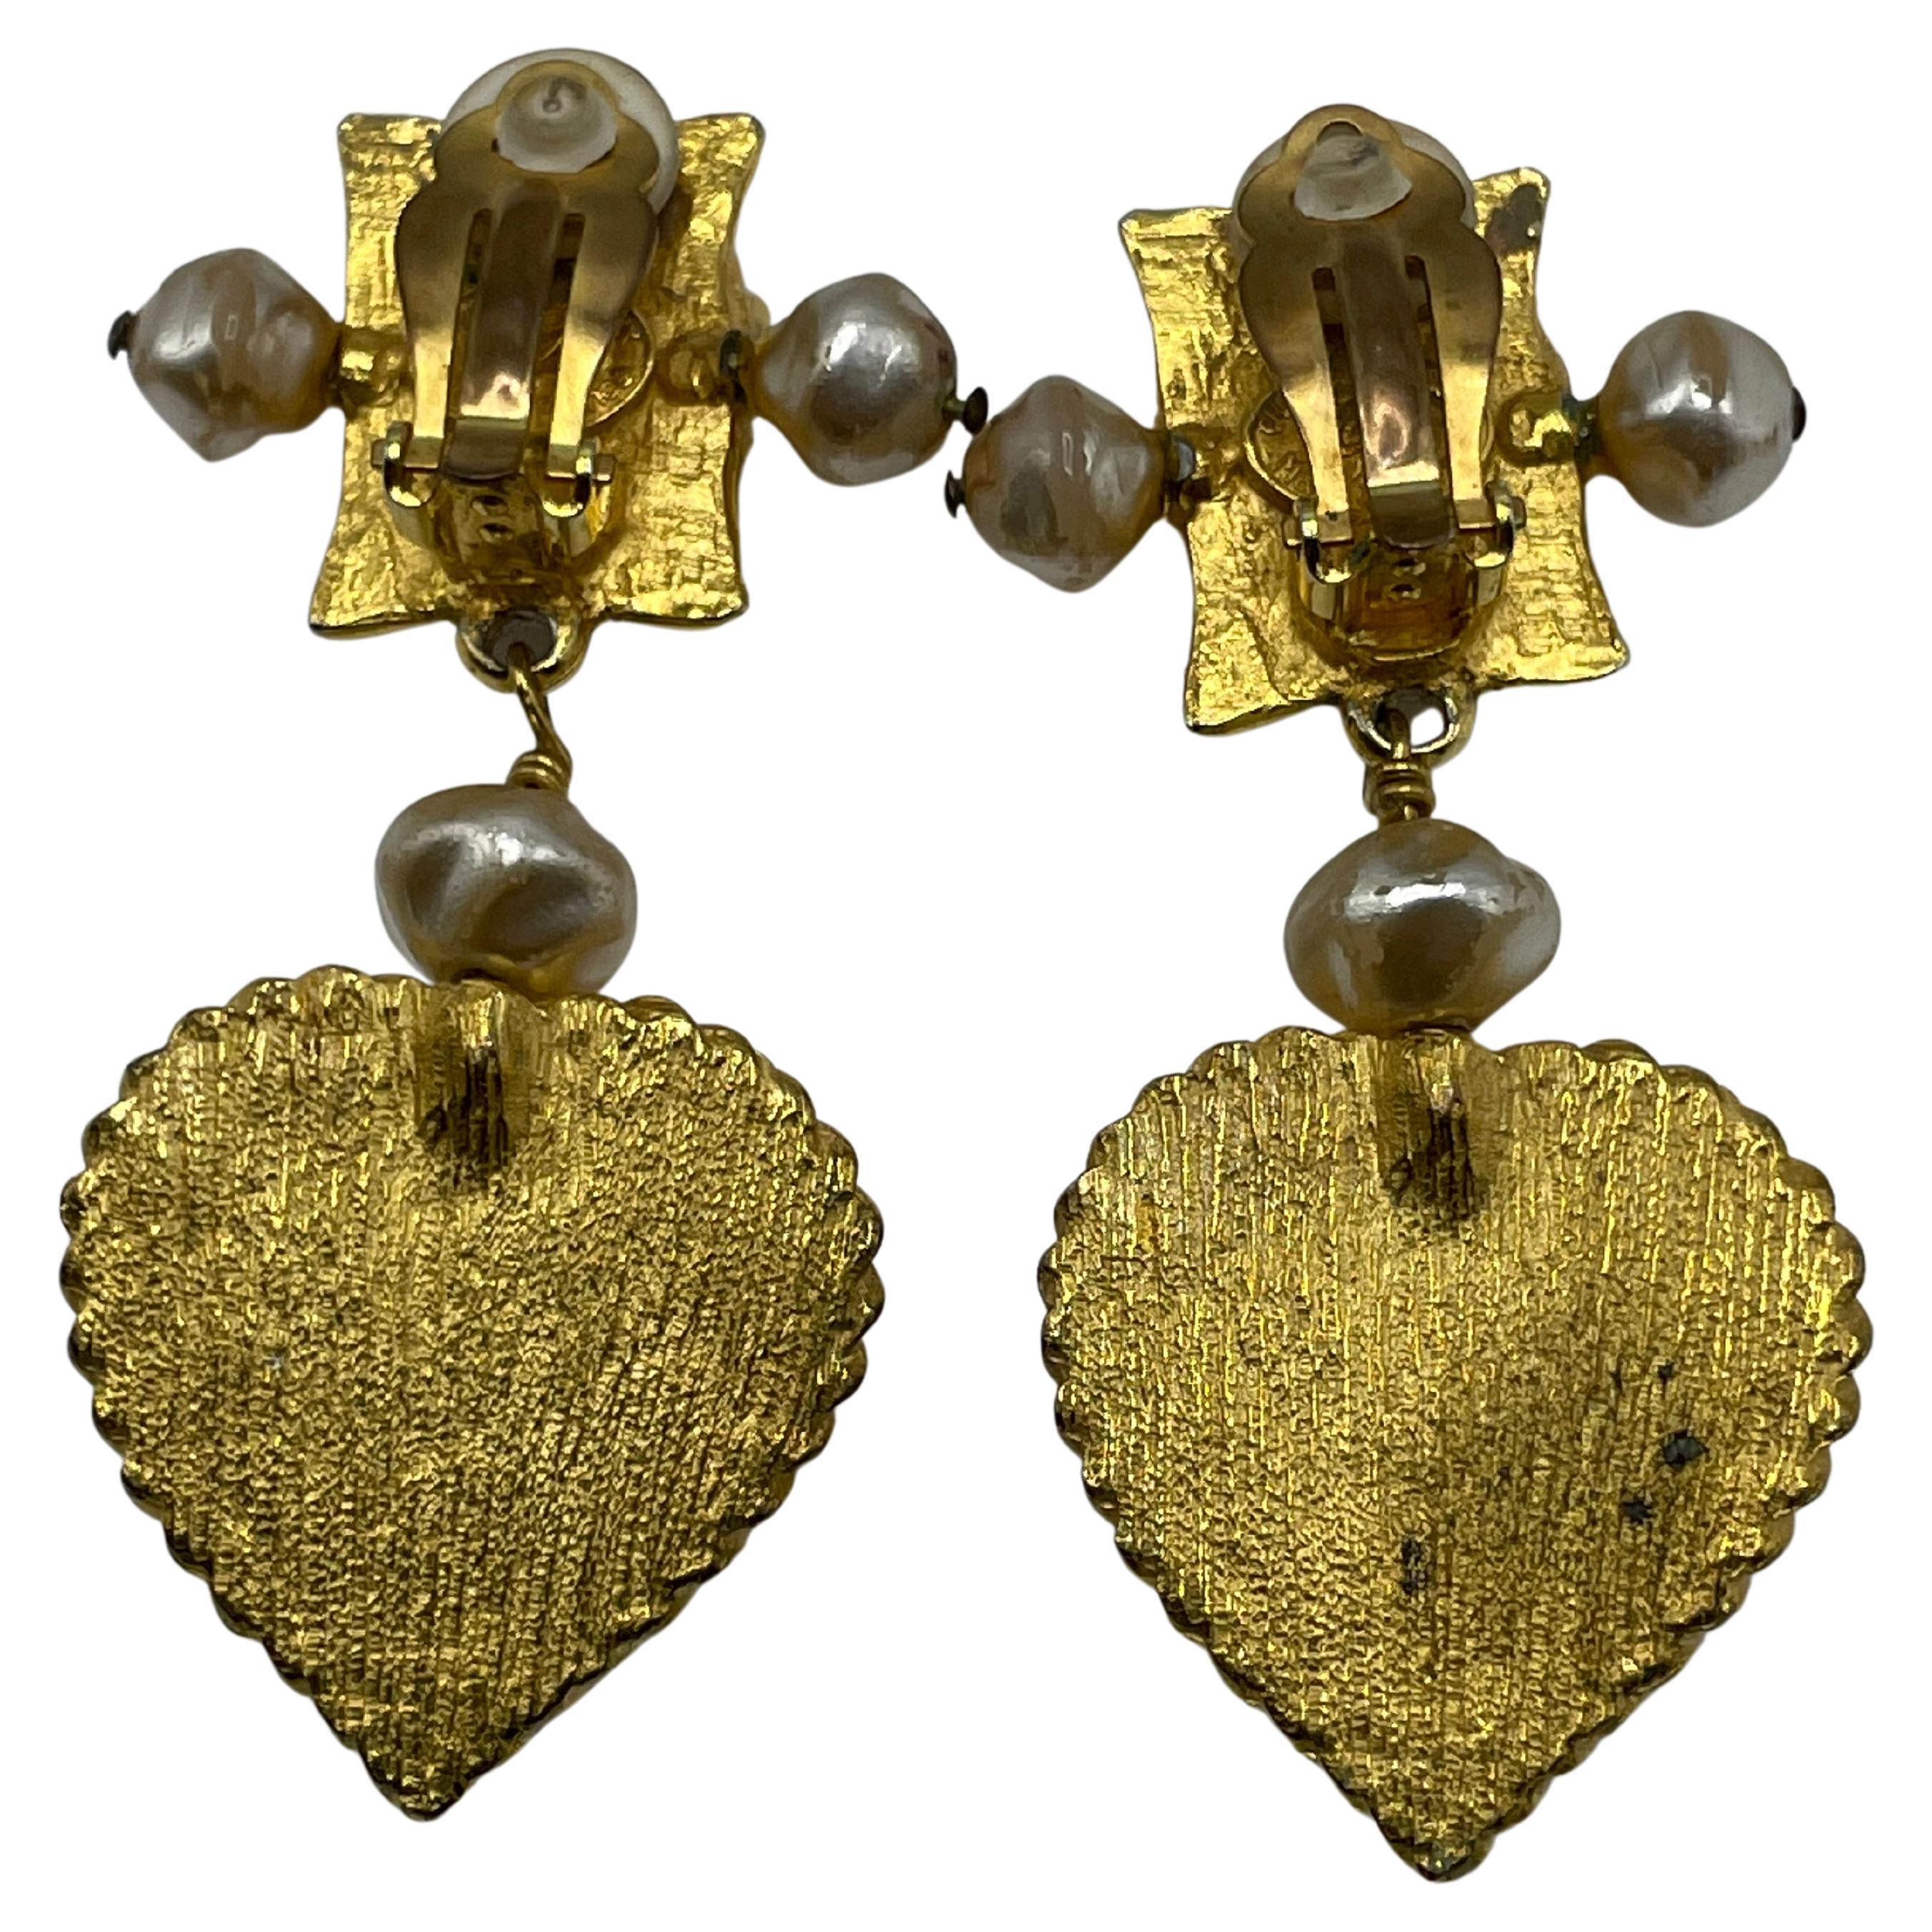 Pearl and velvet clip-on earrings by Christian Lacroix. The heart-shaped pattern on the earrings, which Christian Lacroix frequently employed to create his jewelry, is a representation of his creative aesthetic.
Stamp from Christian Lacroix on the